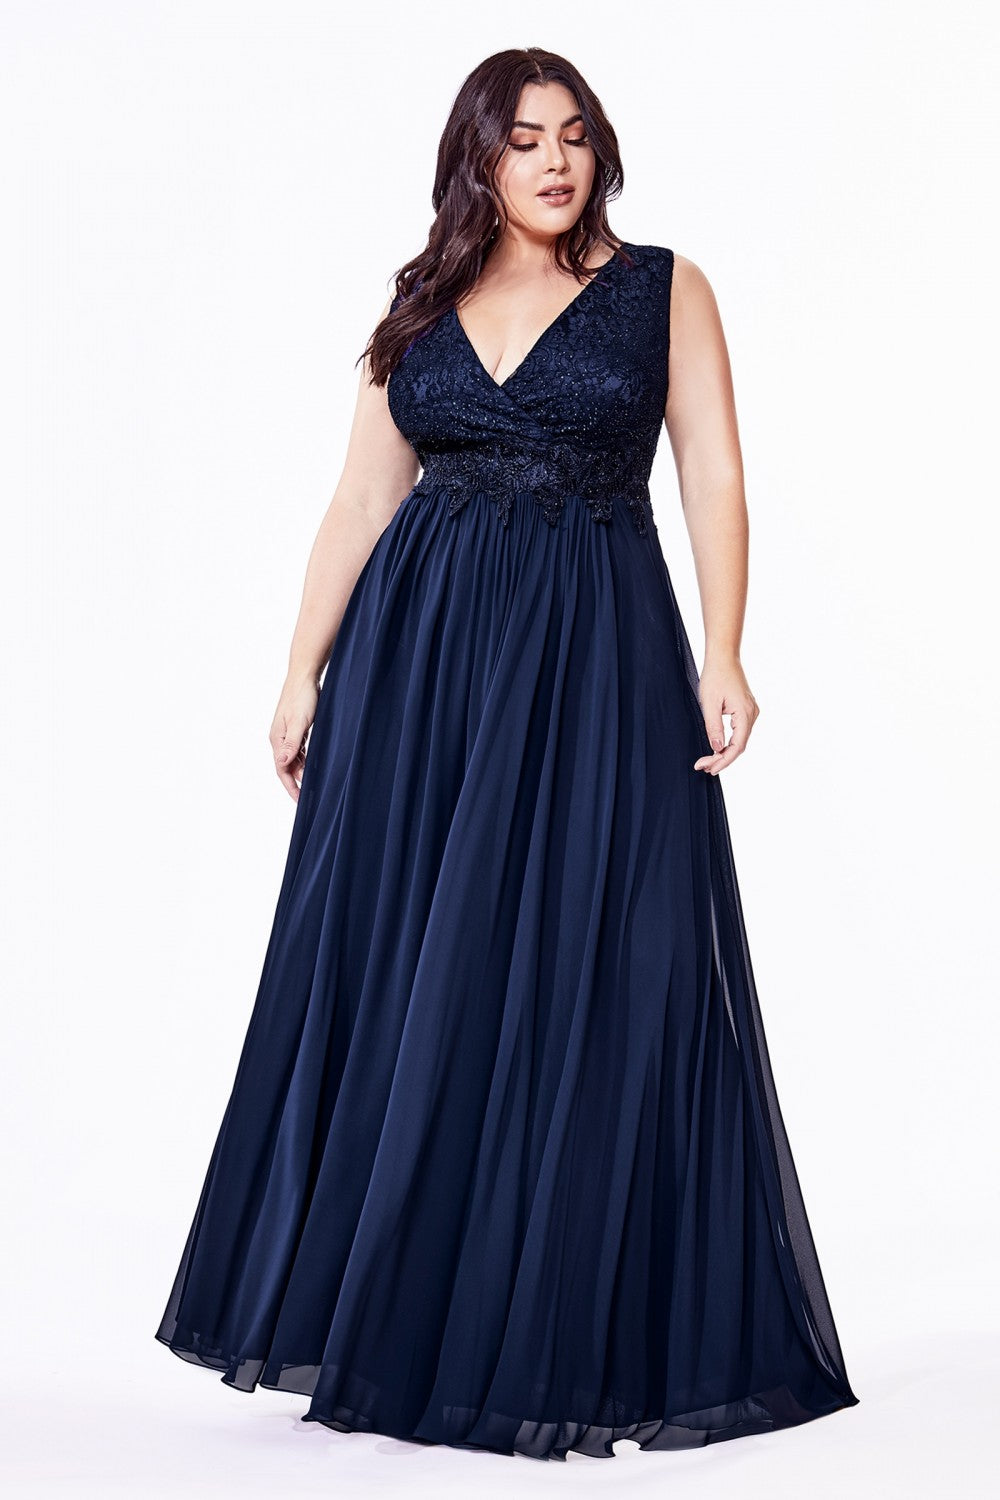 A-line Curve Chiffon Prom & Bridesmaid Dress Evening Plus Size Charming Tender Gown Laced Vintage V-neck Tank Strap Bodice CDS7201 Elsy Style All Dresses